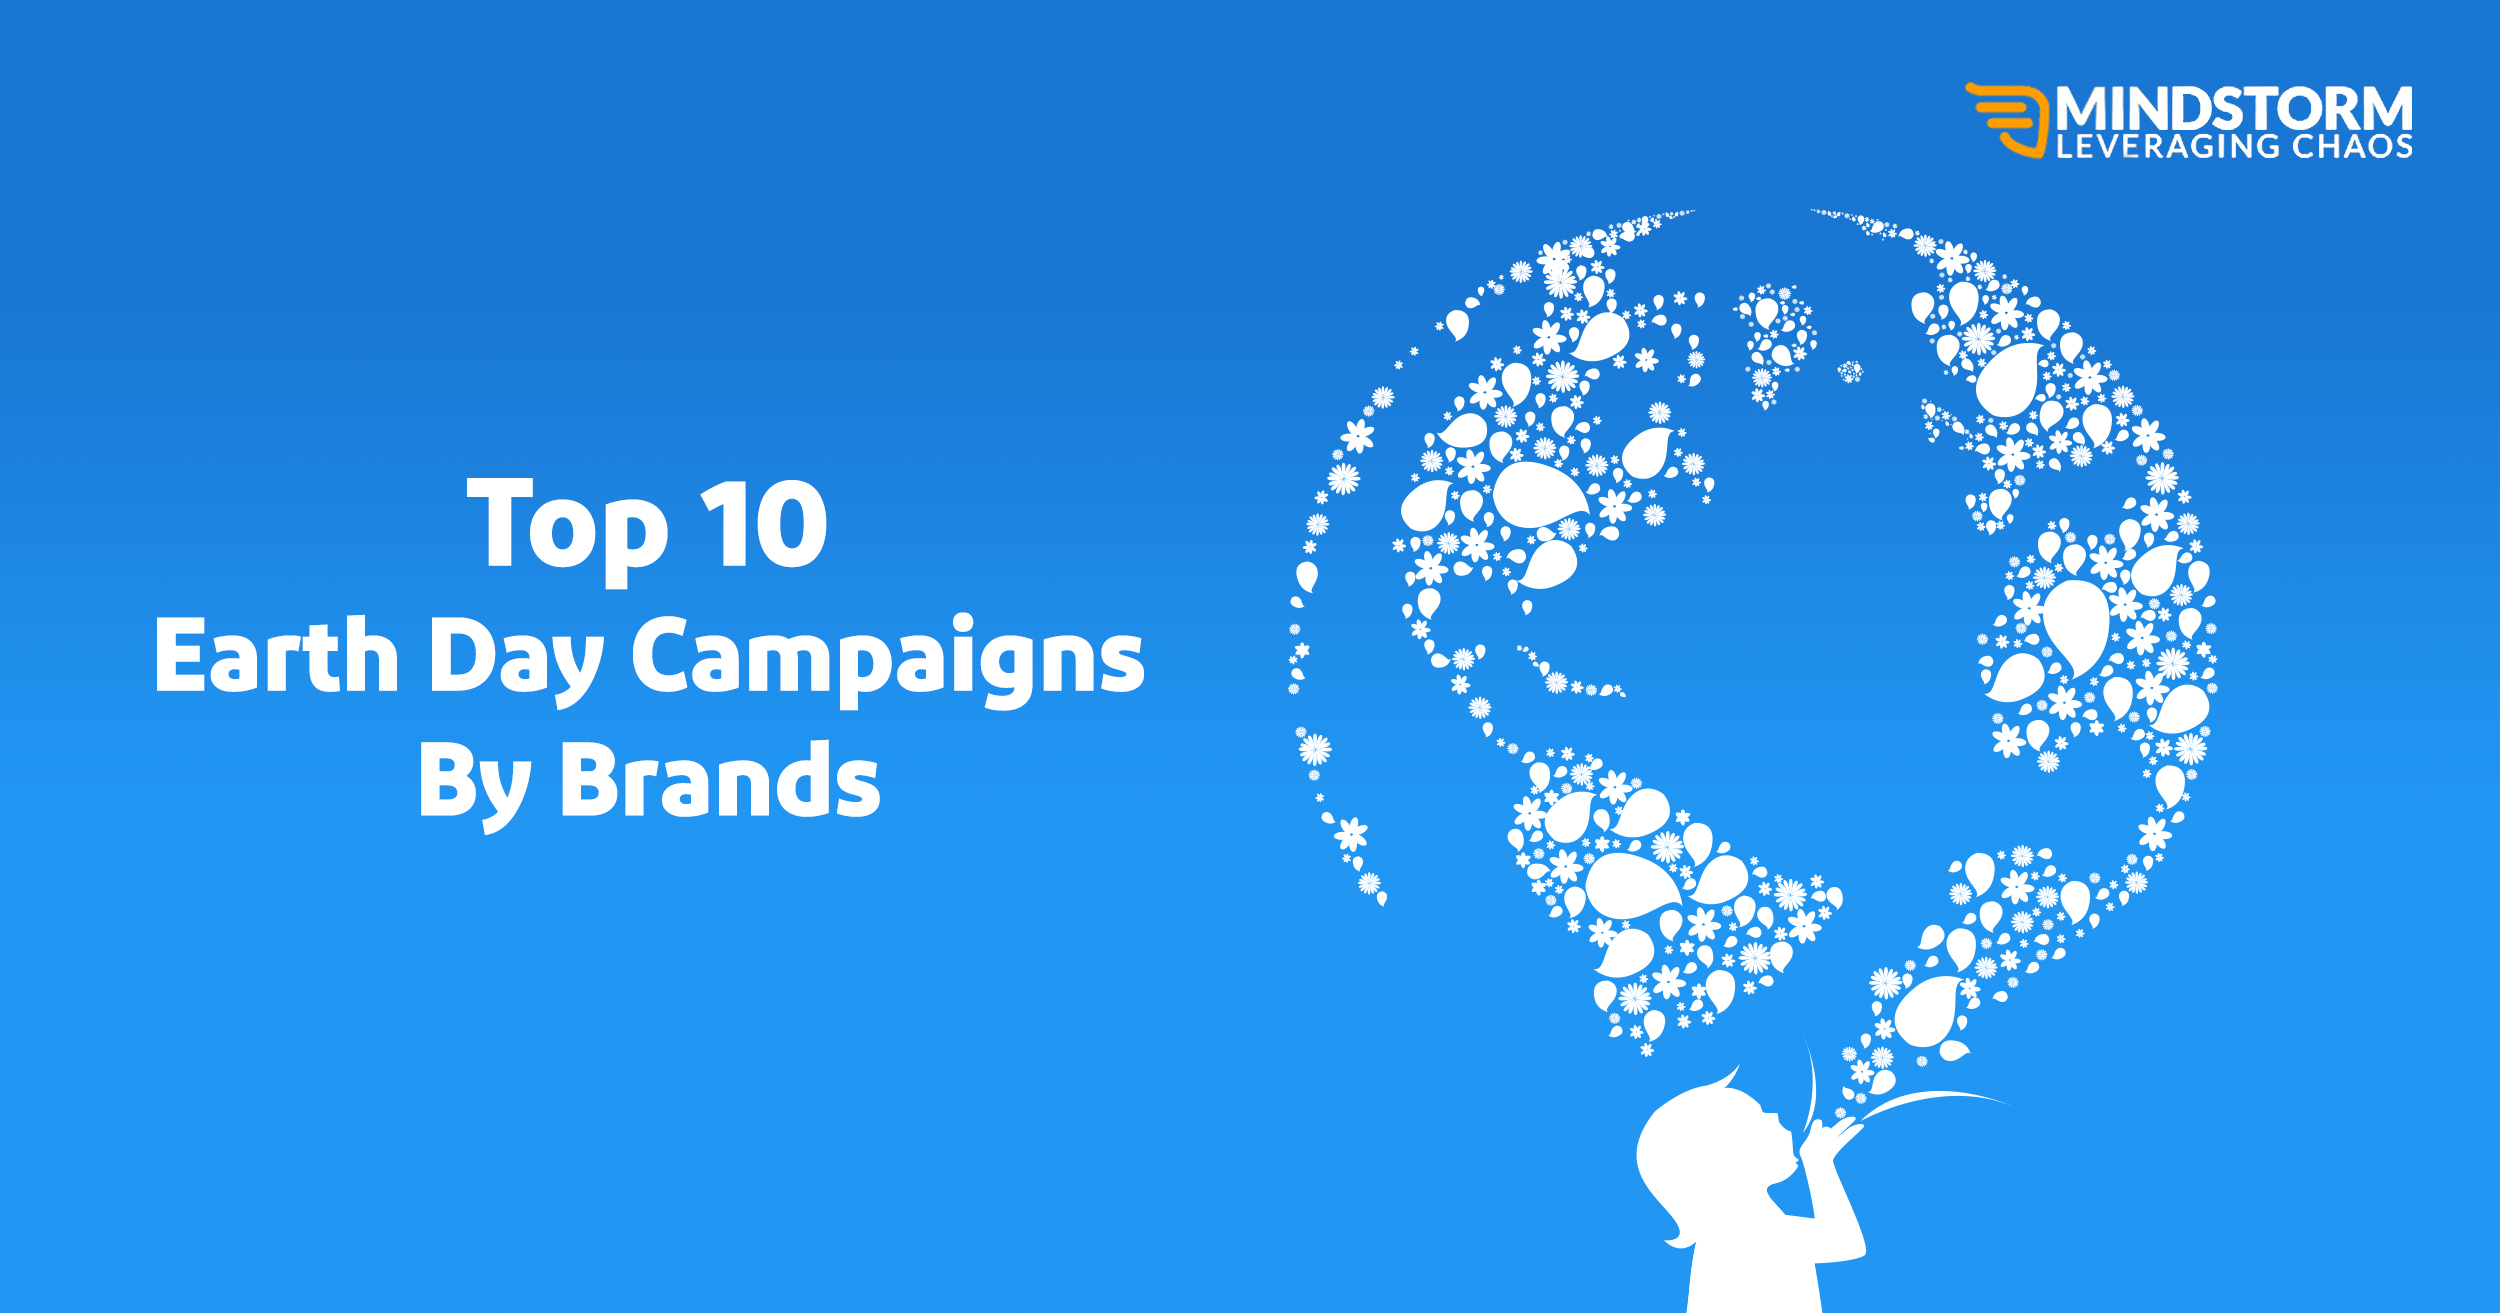 Top 10 Earth Day Campaigns By Brands